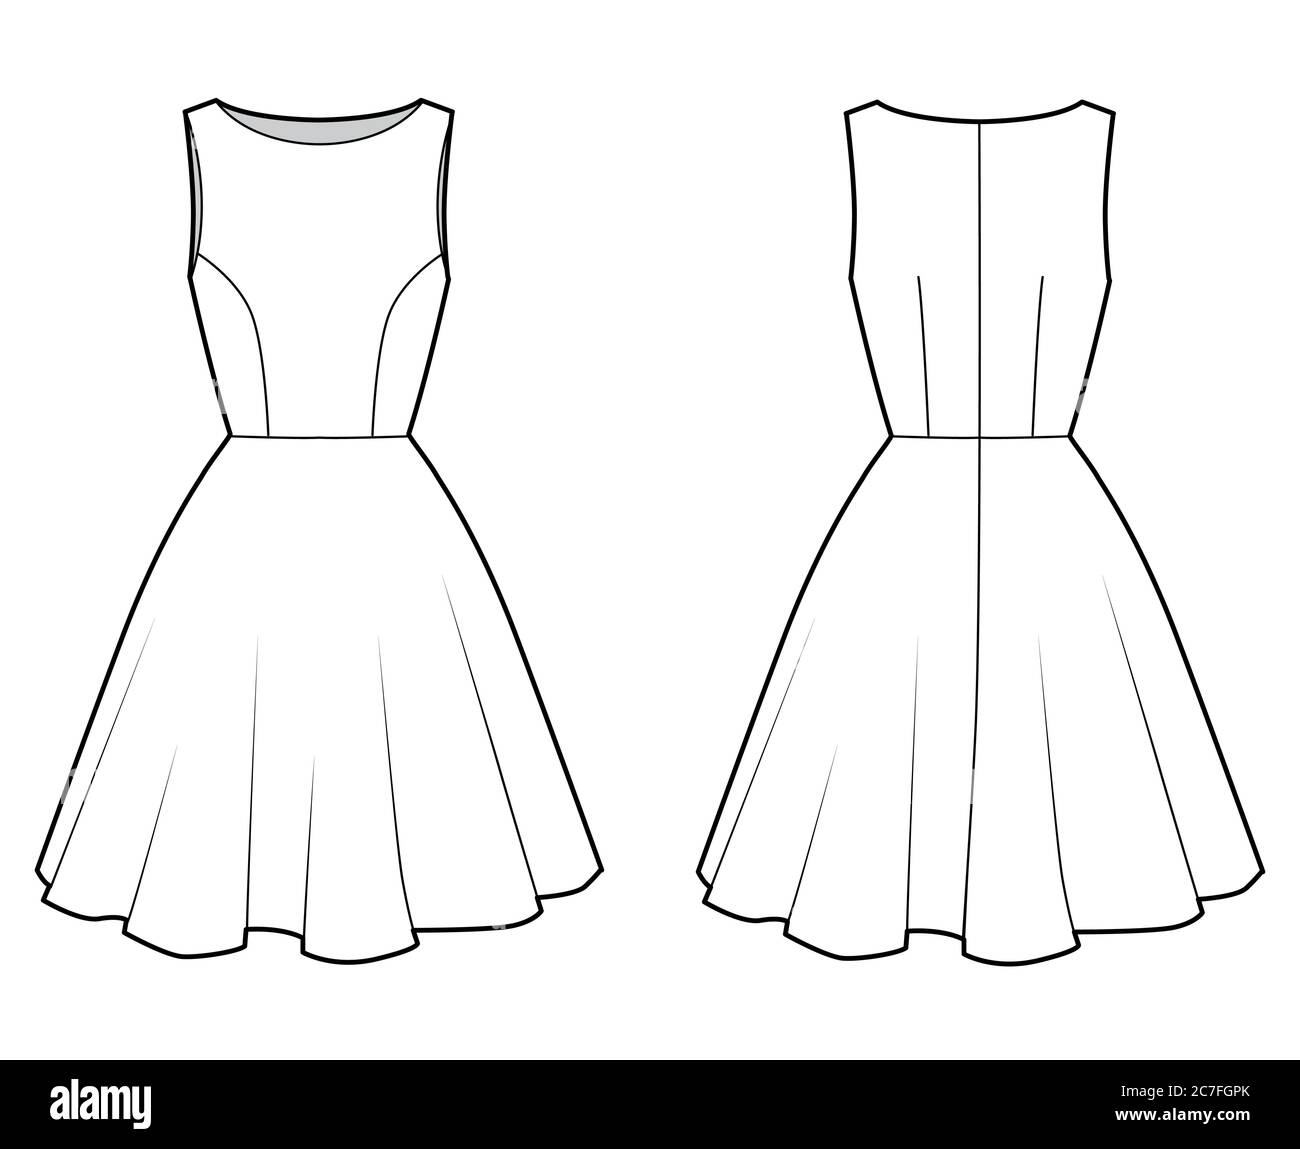 Dress technical fashion illustration with fitted body, boat neck ...